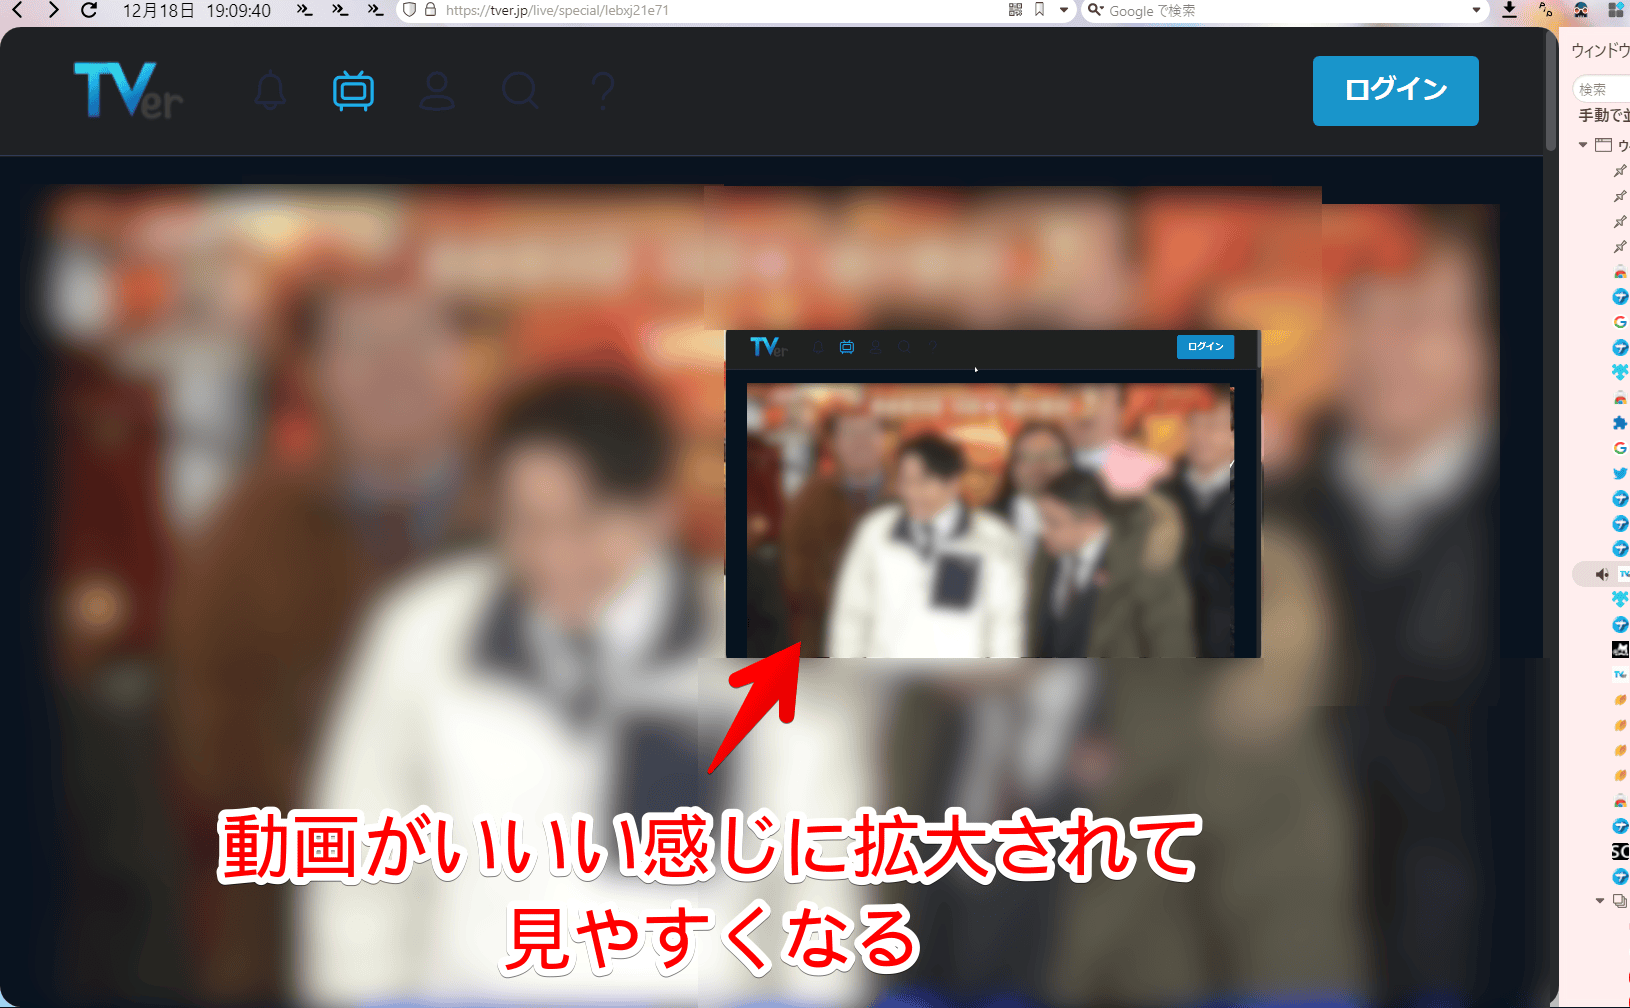 「TVer（ティーバー）」を拡大して、「Picture-in-Picture any site」で表示した画像